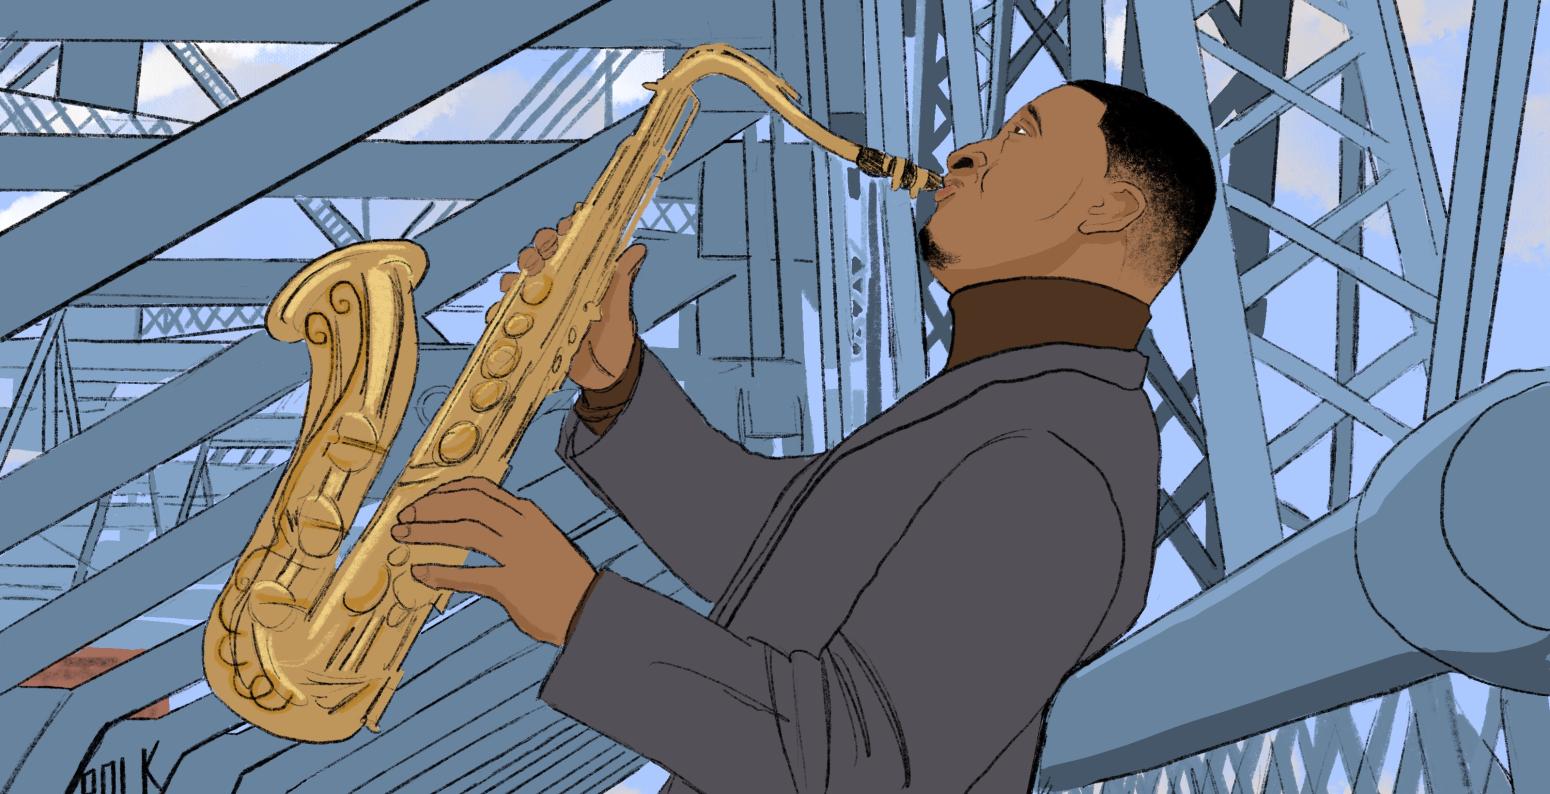 Sonny Rollins playing the saxophone on a bridge as a car drives by.